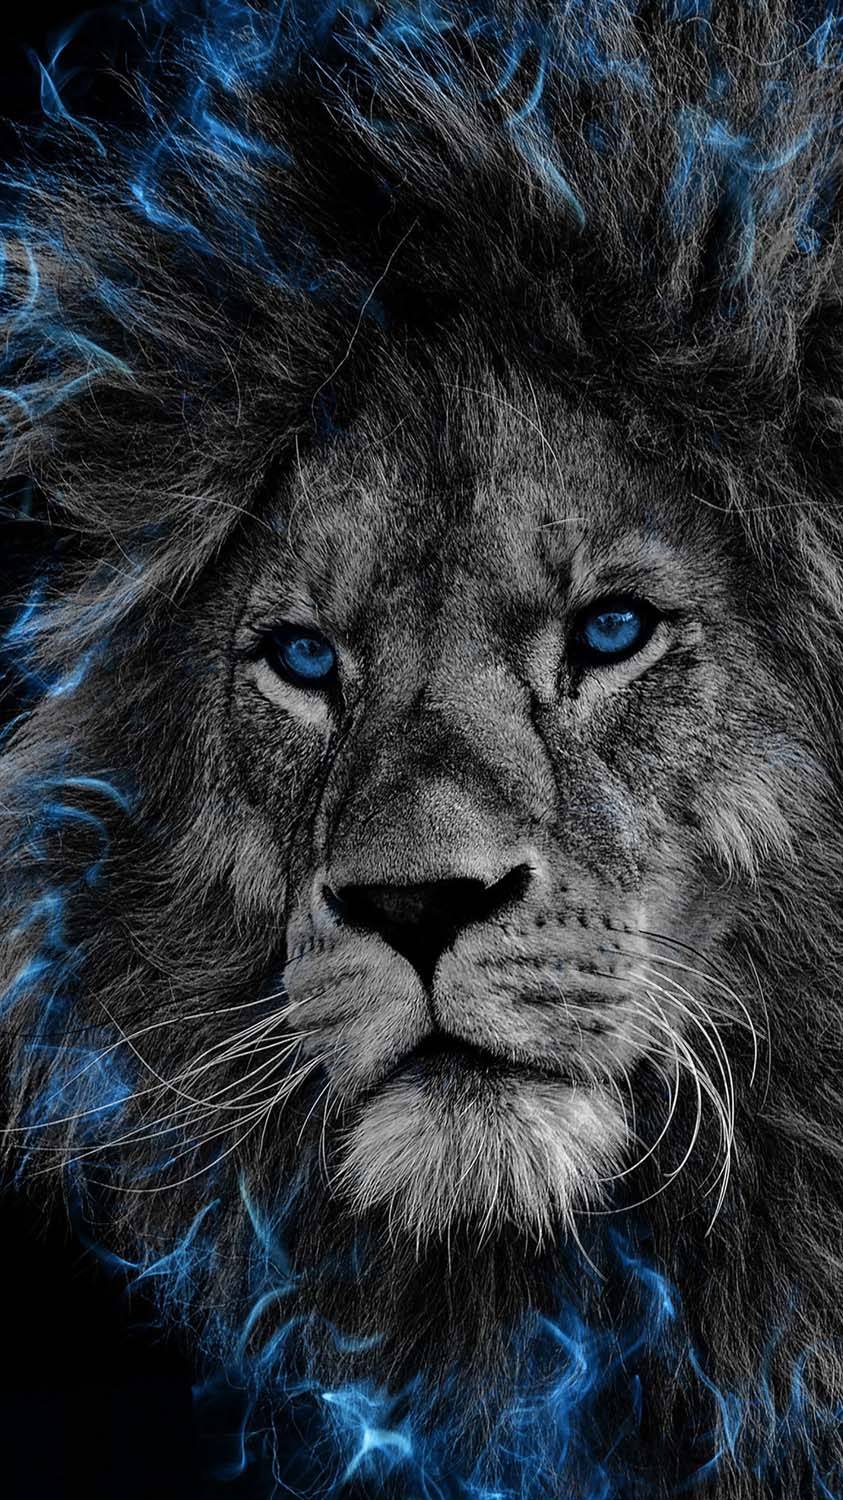 The Lion IPhone Wallpaper HD  IPhone Wallpapers